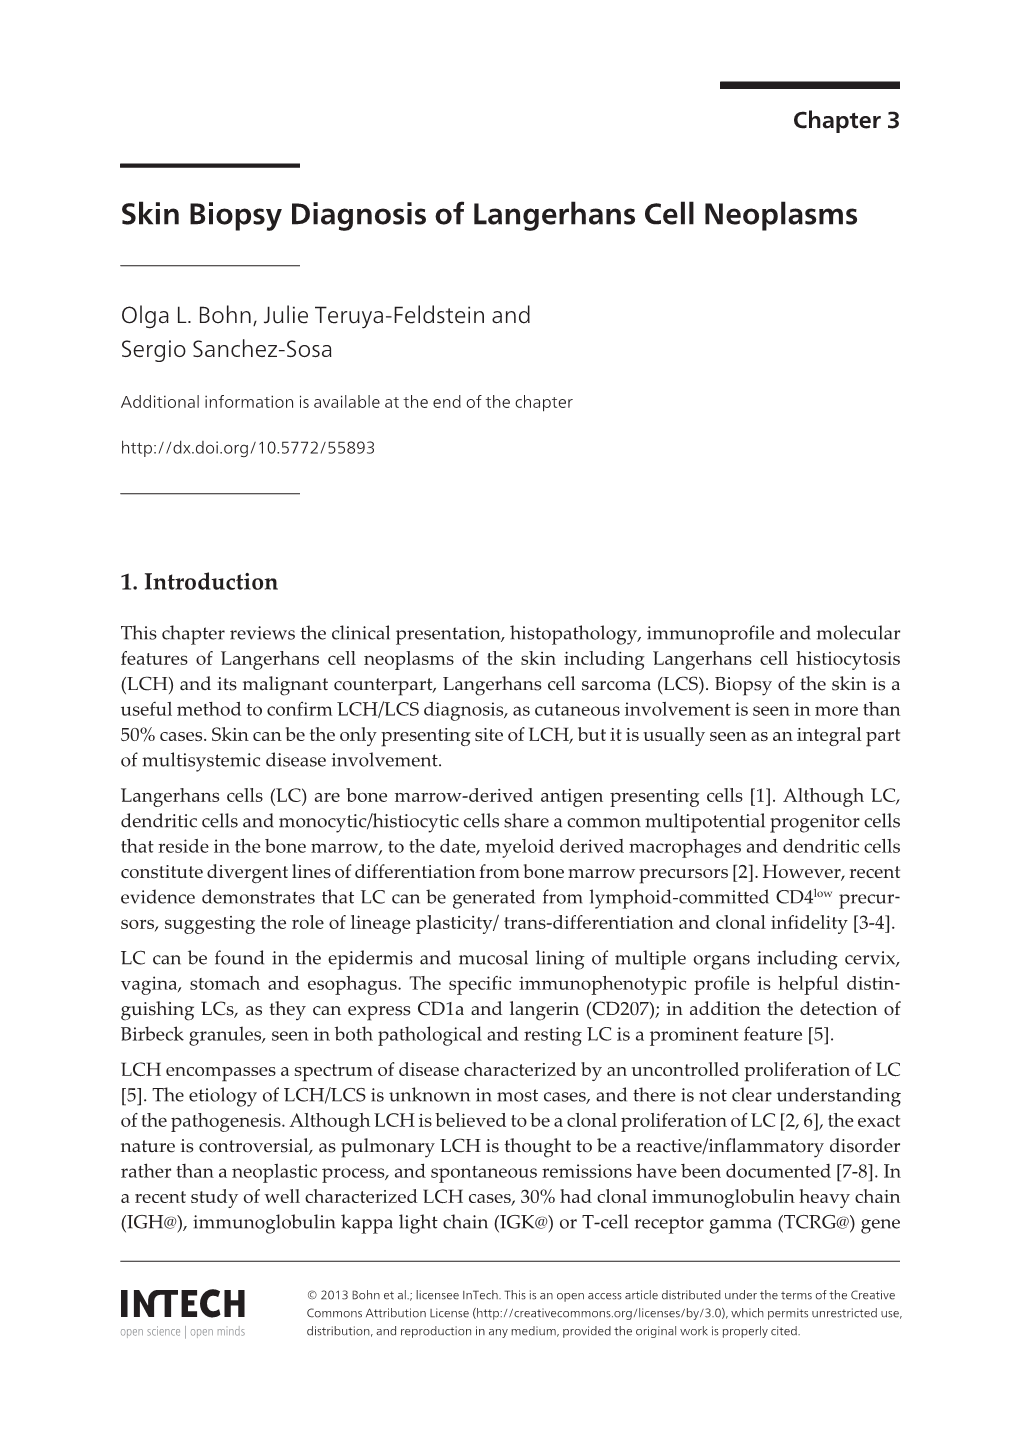 Skin Biopsy Diagnosis of Langerhans Cell Neoplasms